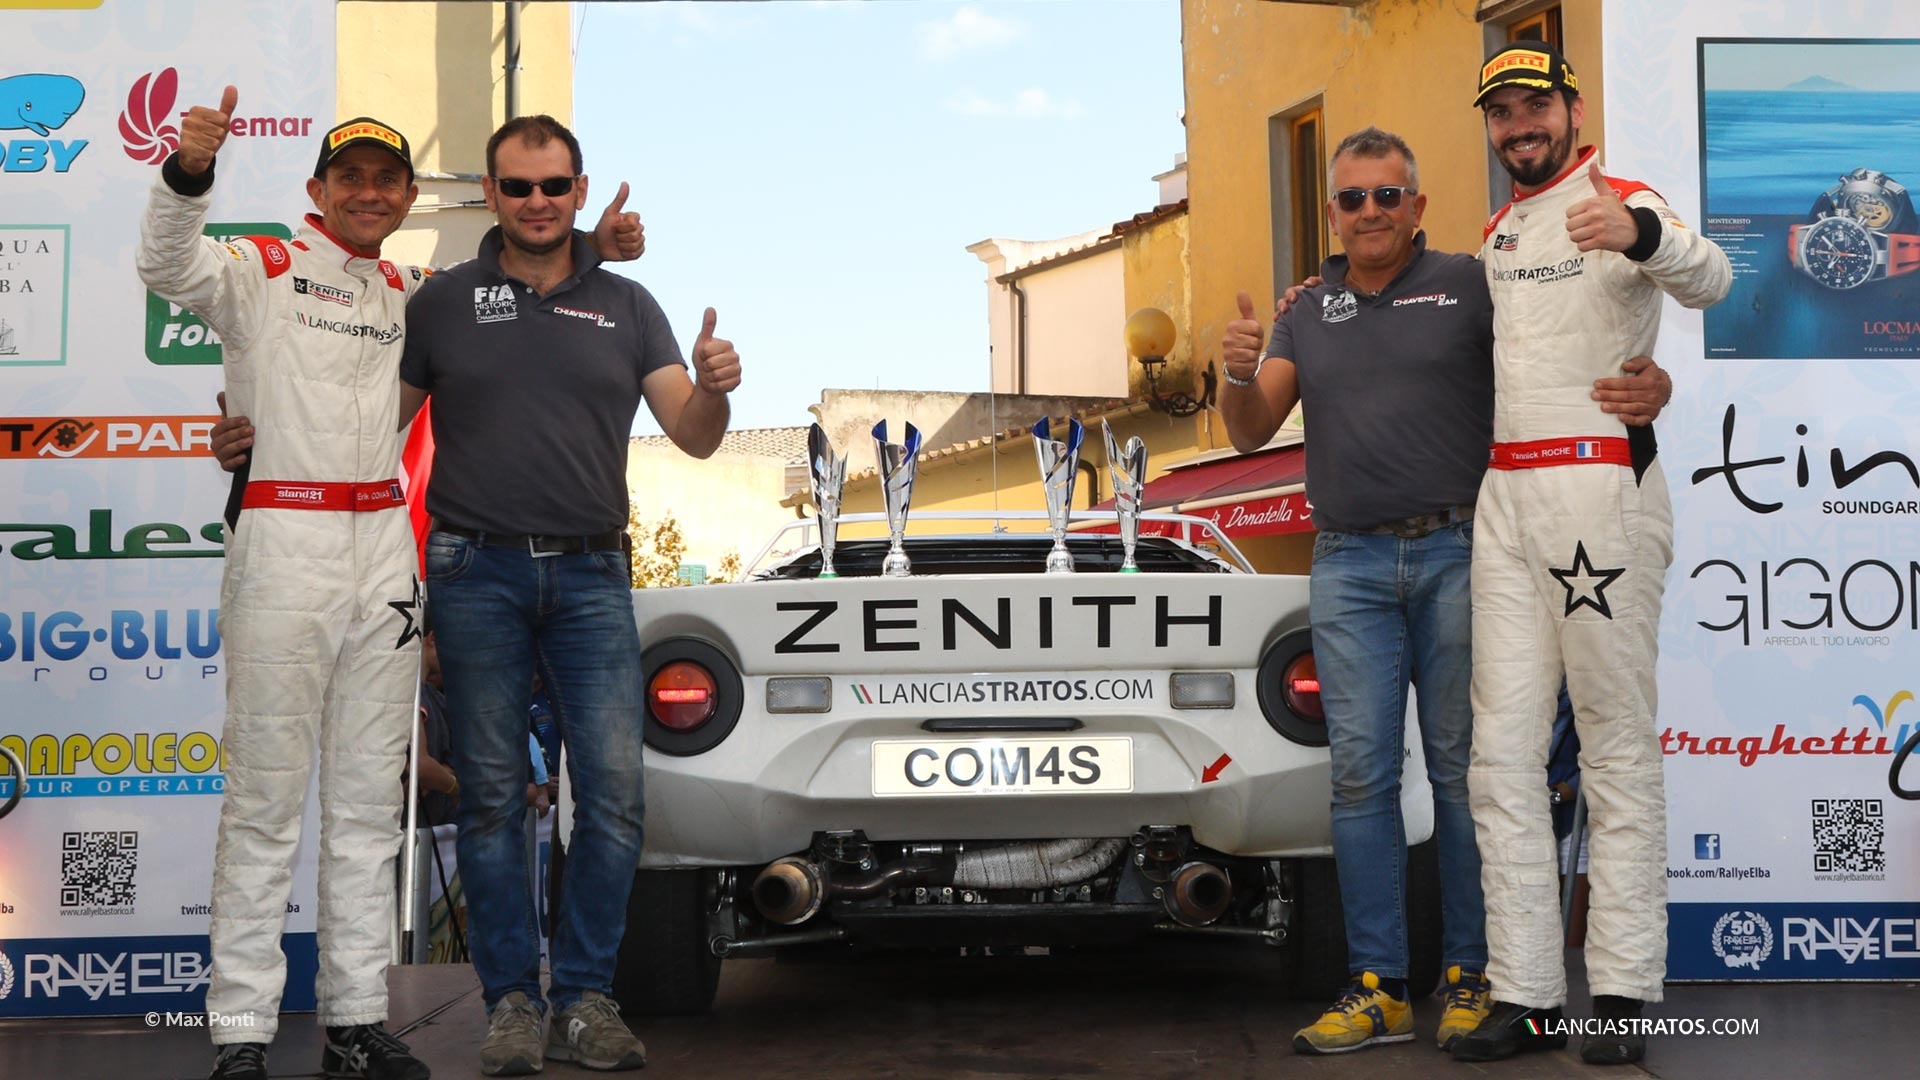 Victory at Elba and Championship title for Comas/Roche' Stratos